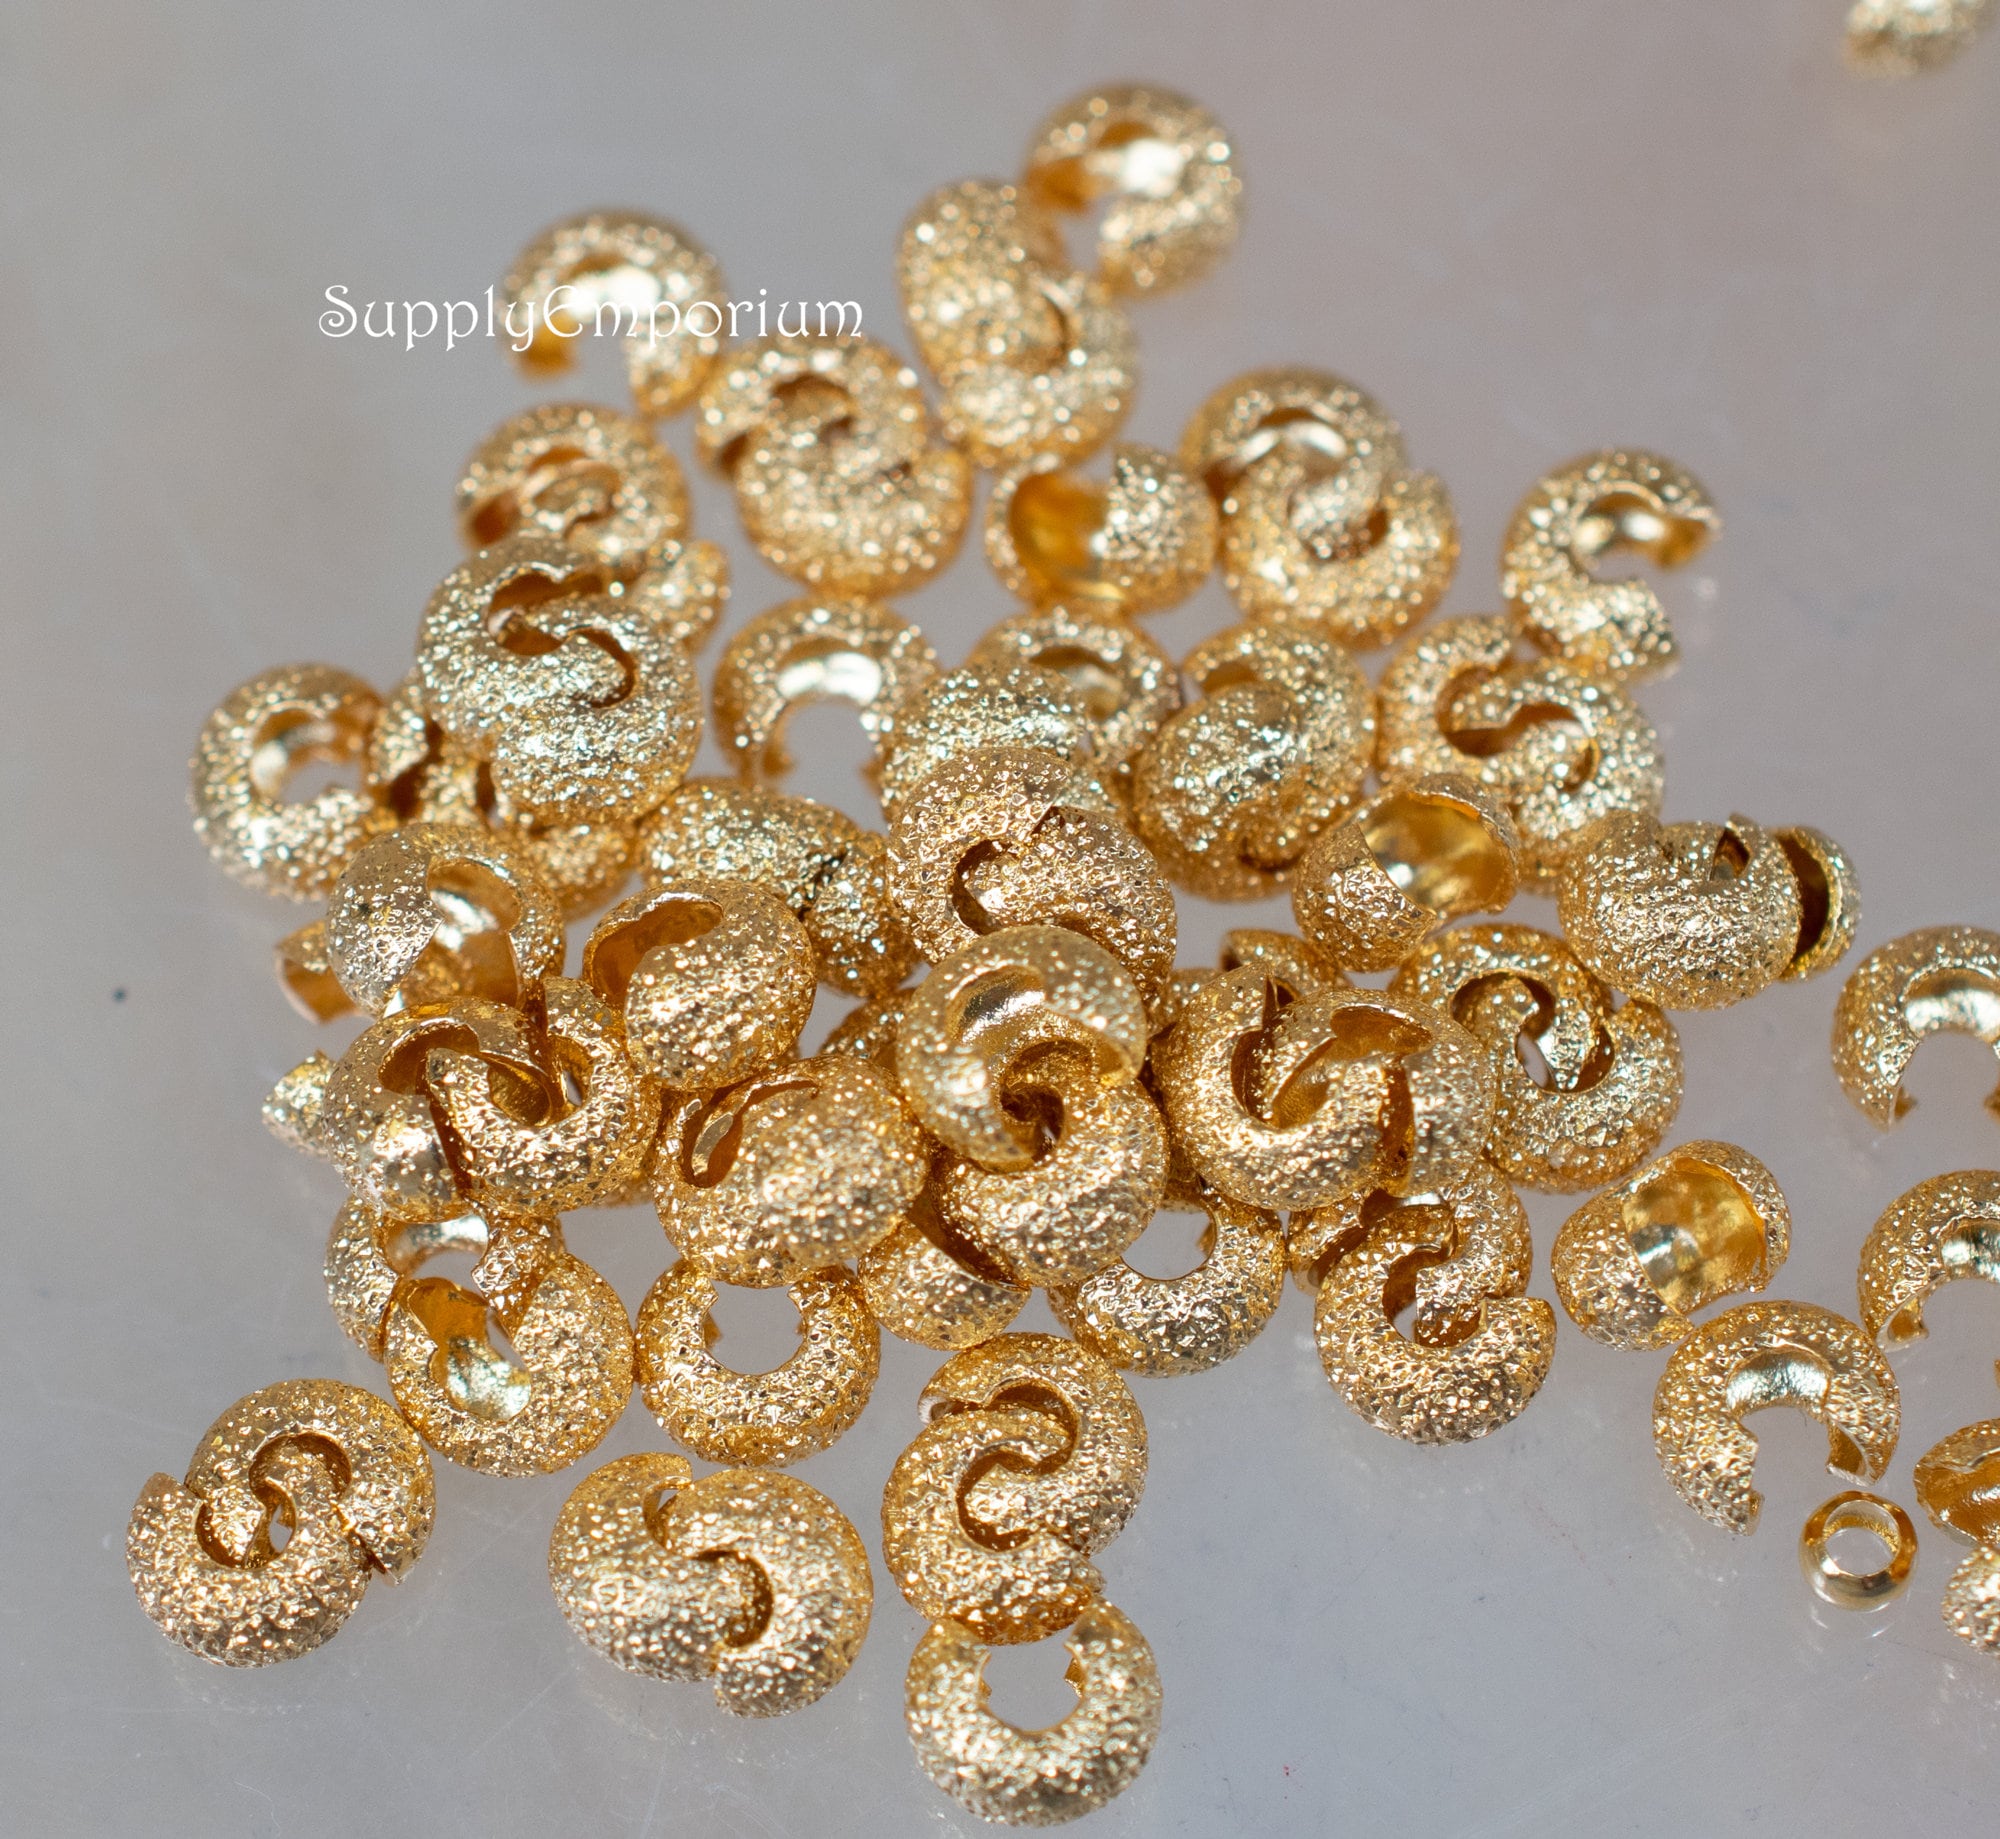 Textured Brass Gold Plated 4mm Crimp Covers - 20 Pieces